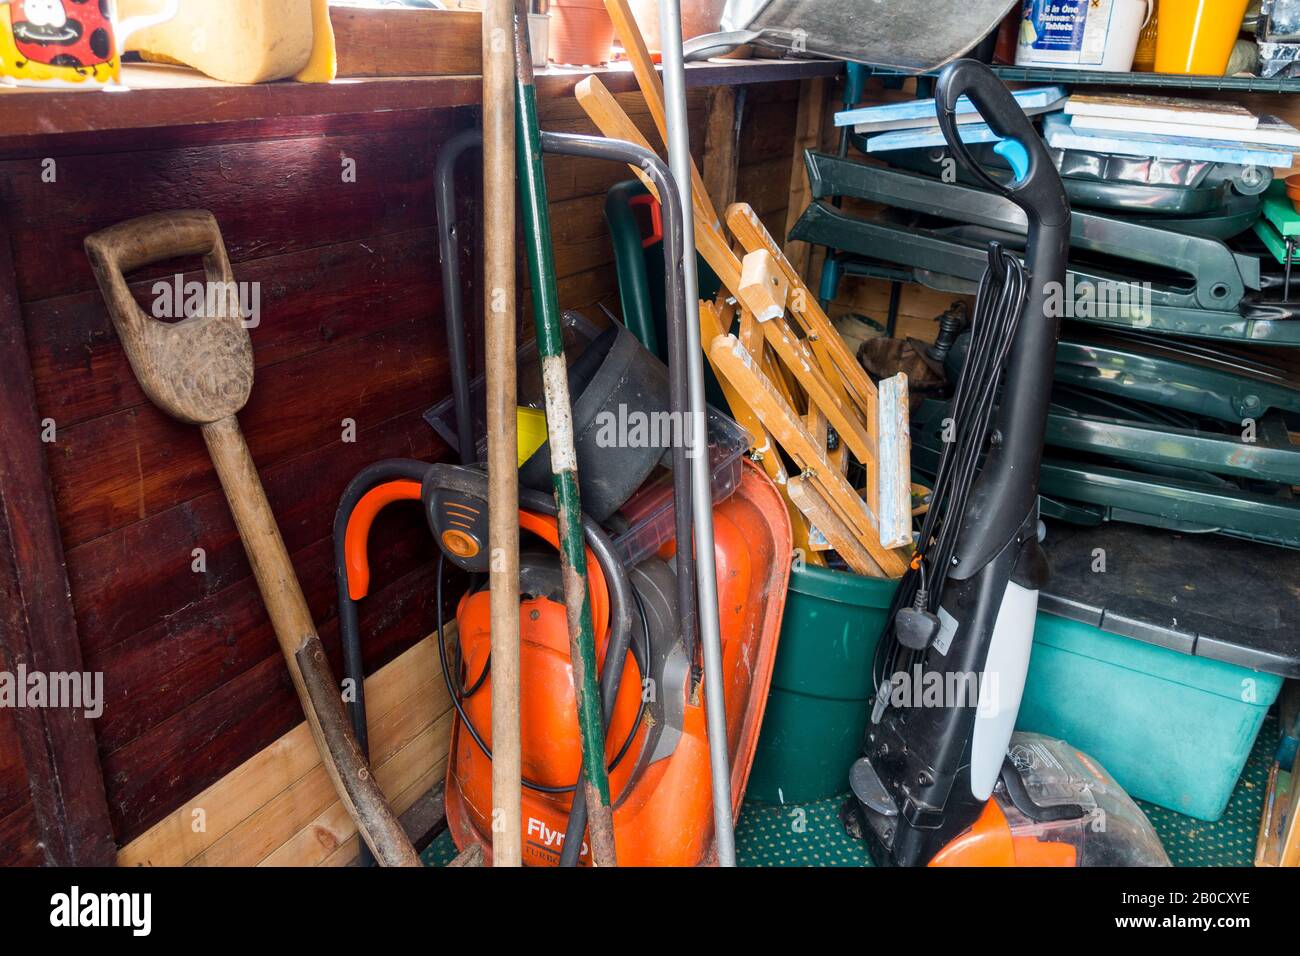 garden shed with door open showing disorganised contents. Scotland UK Stock Photo